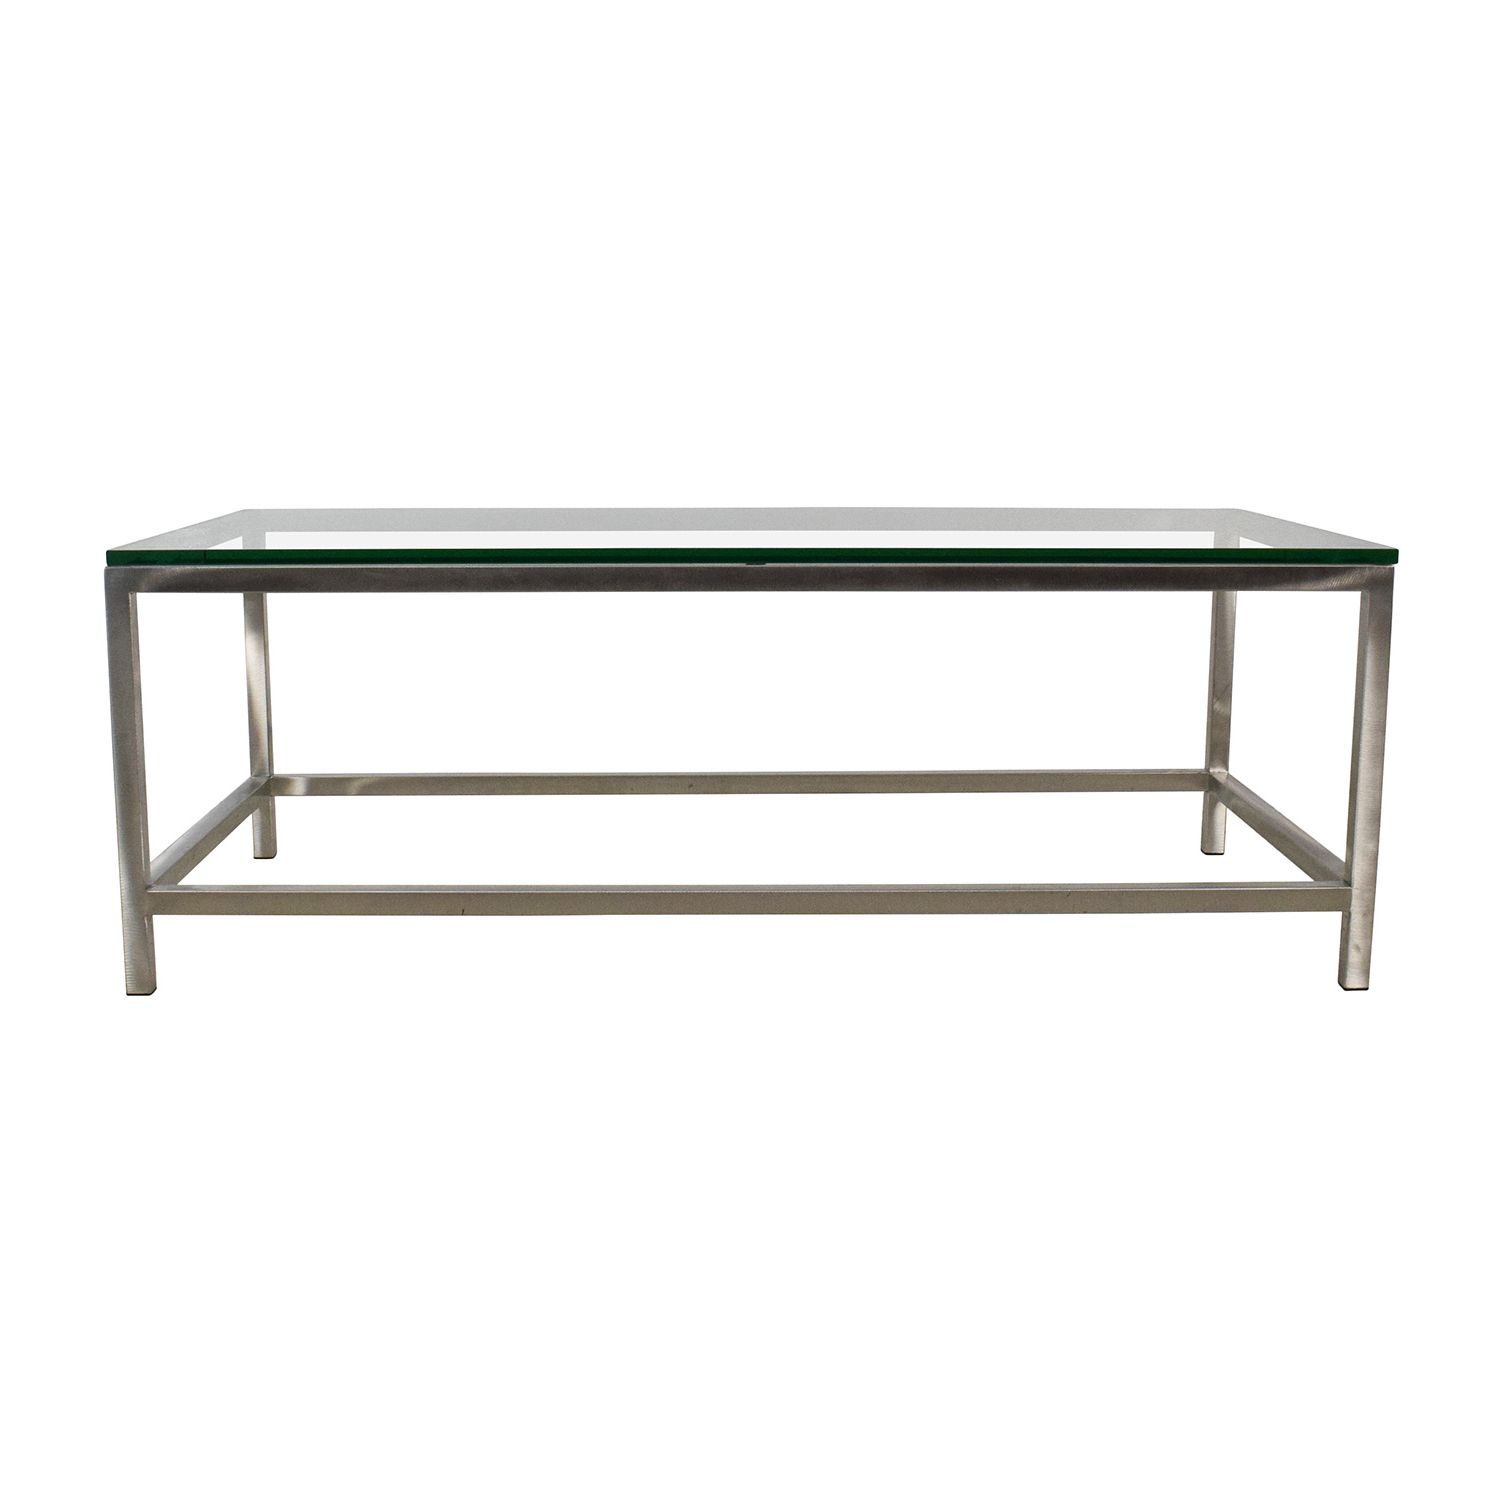 [%64% Off – Crate And Barrel Crate & Barrel Era Rectangular Glass Top In Widely Used Era Glass Console Tables|era Glass Console Tables In Well Liked 64% Off – Crate And Barrel Crate & Barrel Era Rectangular Glass Top|2017 Era Glass Console Tables For 64% Off – Crate And Barrel Crate & Barrel Era Rectangular Glass Top|most Recently Released 64% Off – Crate And Barrel Crate & Barrel Era Rectangular Glass Top Intended For Era Glass Console Tables%] (View 14 of 20)